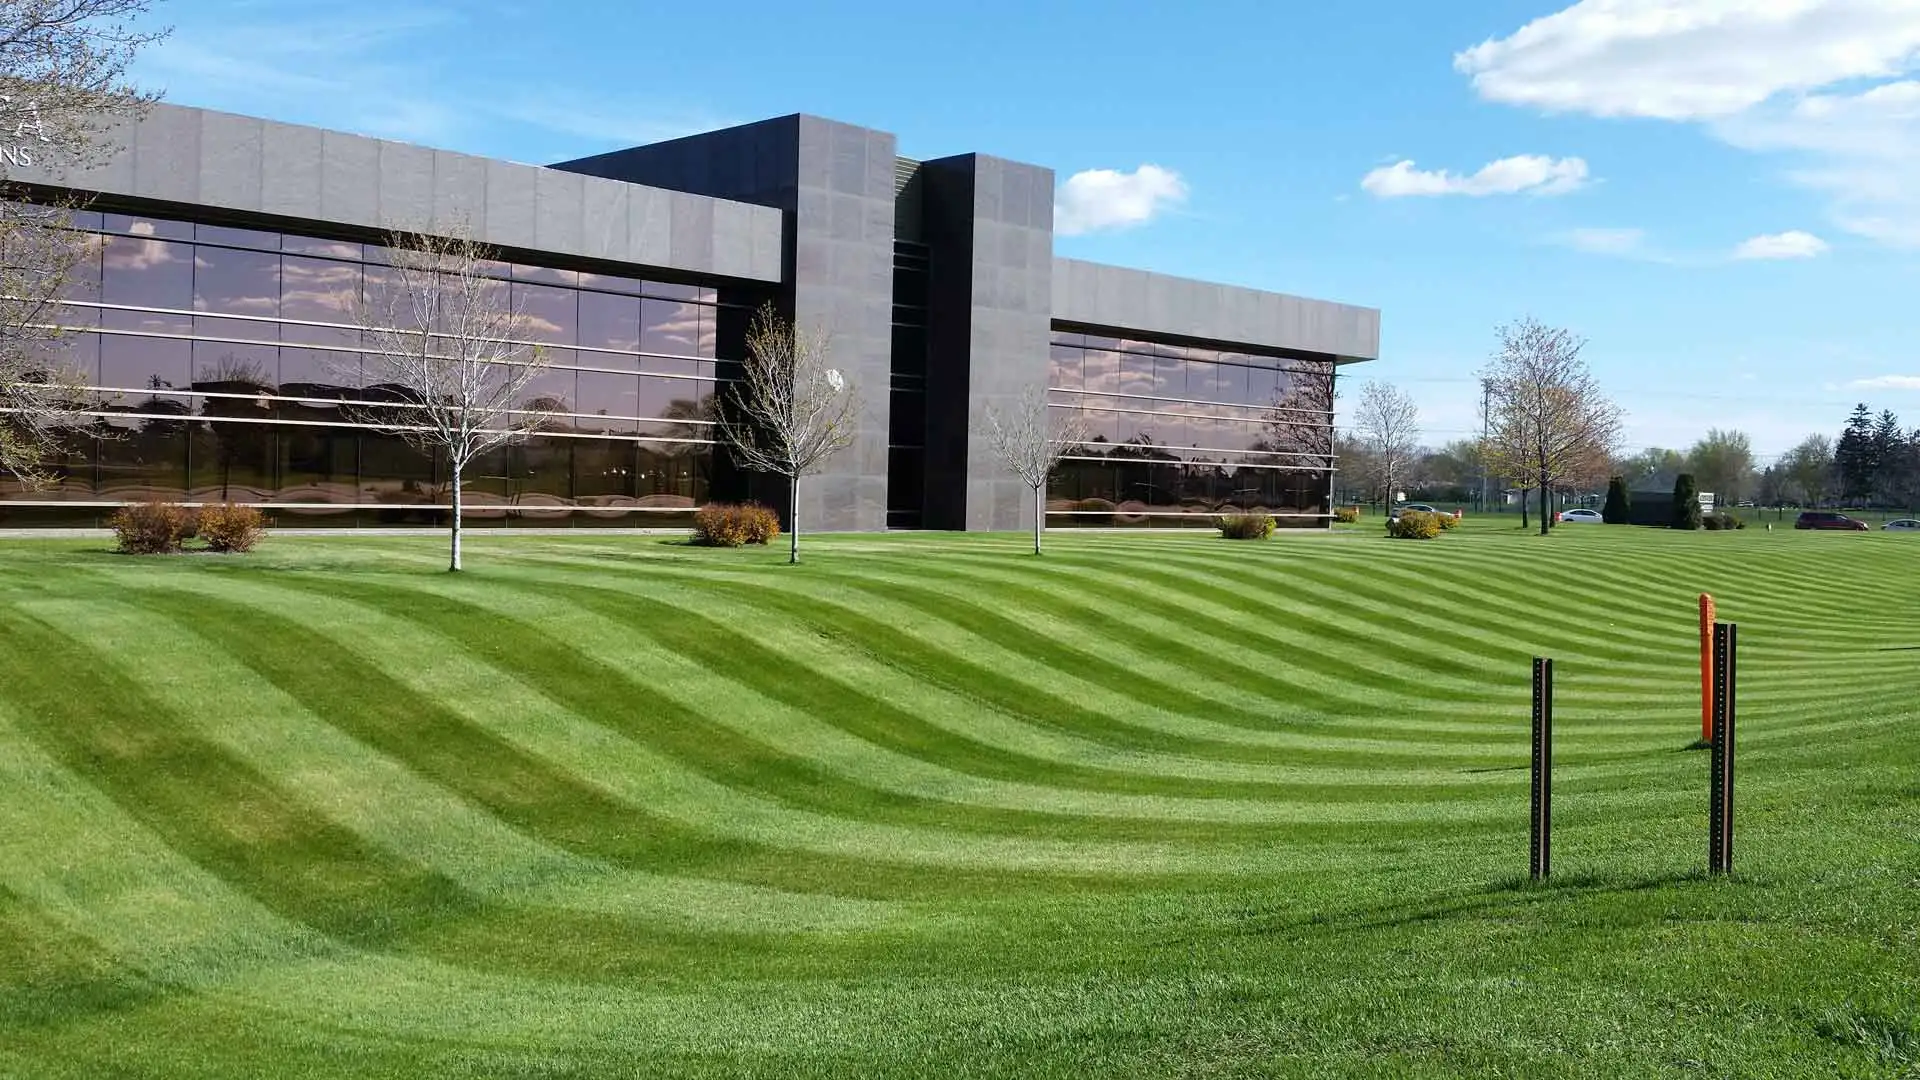 Commercial building in St. Cloud, MN with mowing stripes in lawn.